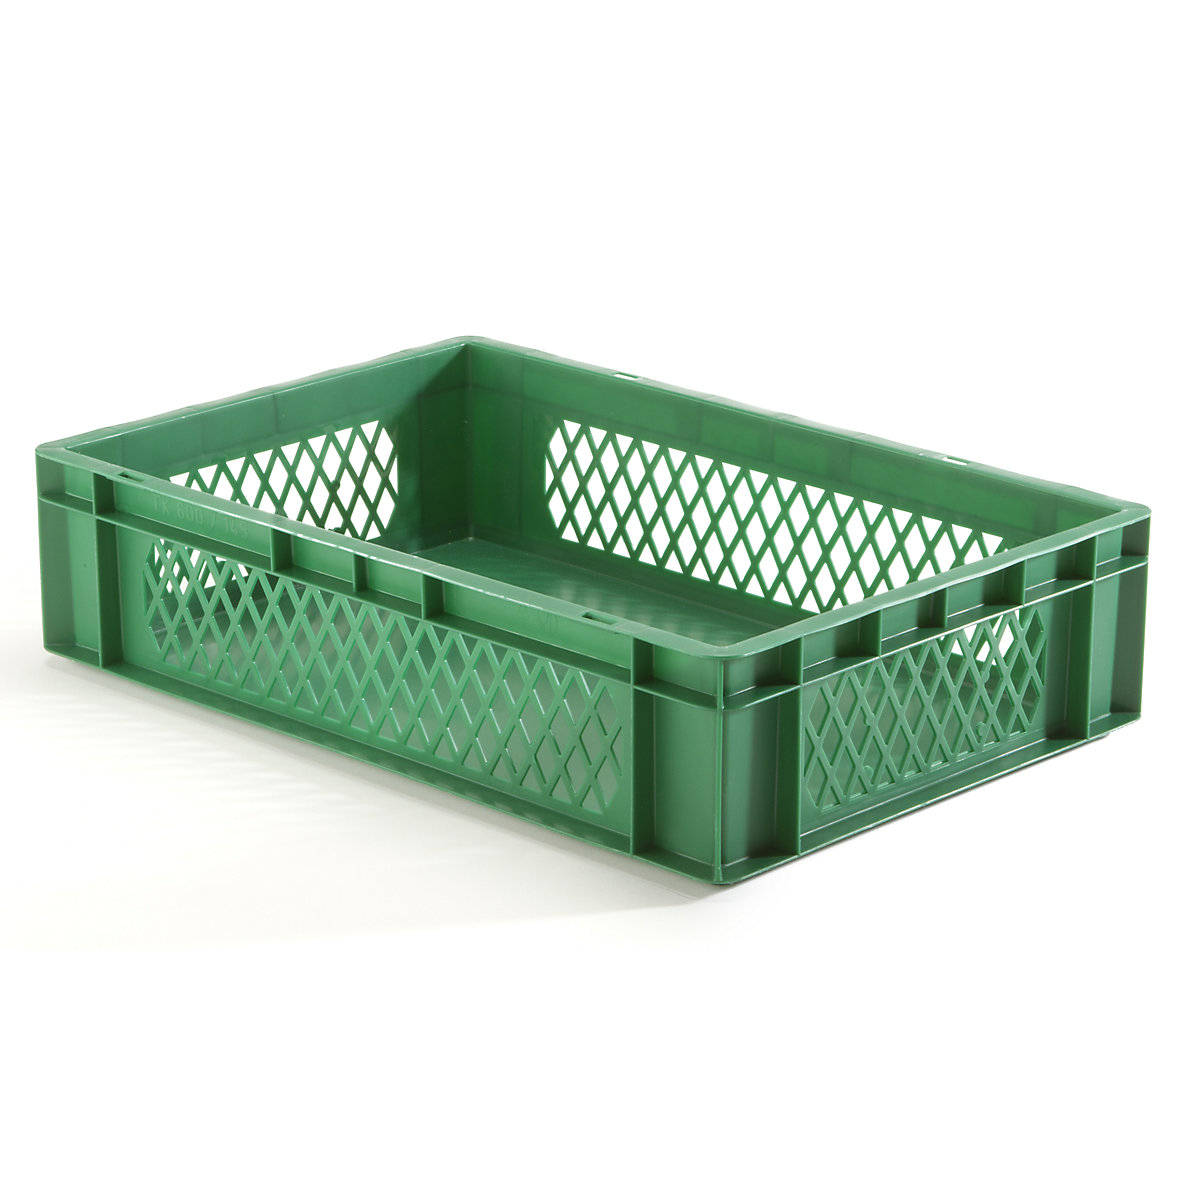 Euro stacking container, perforated walls, closed base, LxWxH 600 x 400 x 145 mm, green, pack of 5